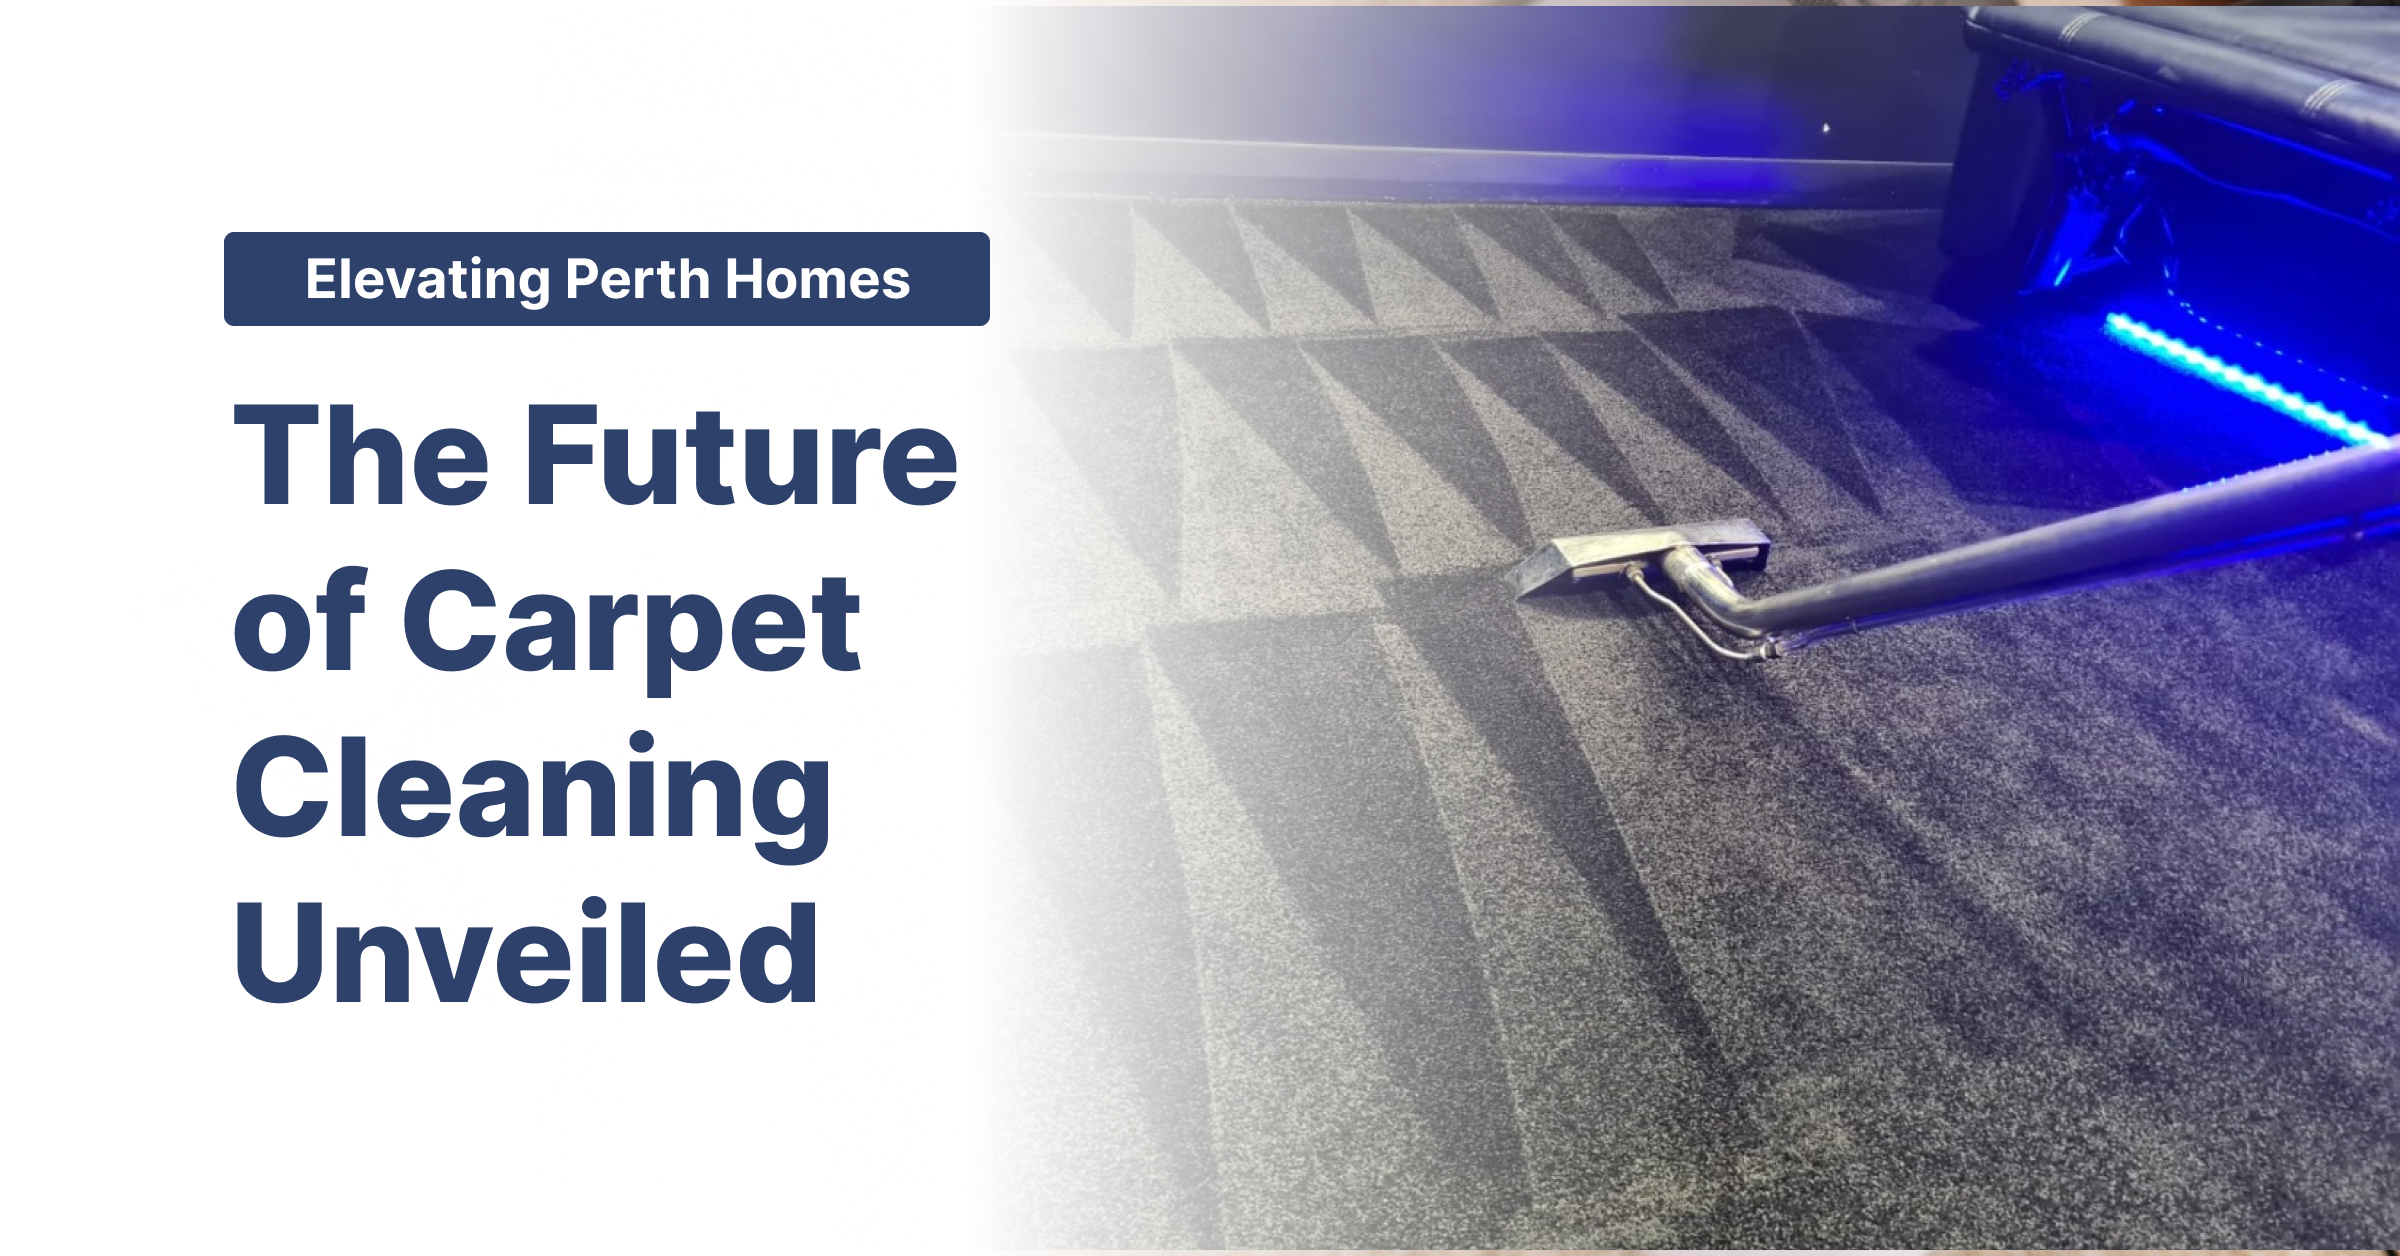 Elevating Perth Homes: The Future of Carpet Cleaning Unveiled